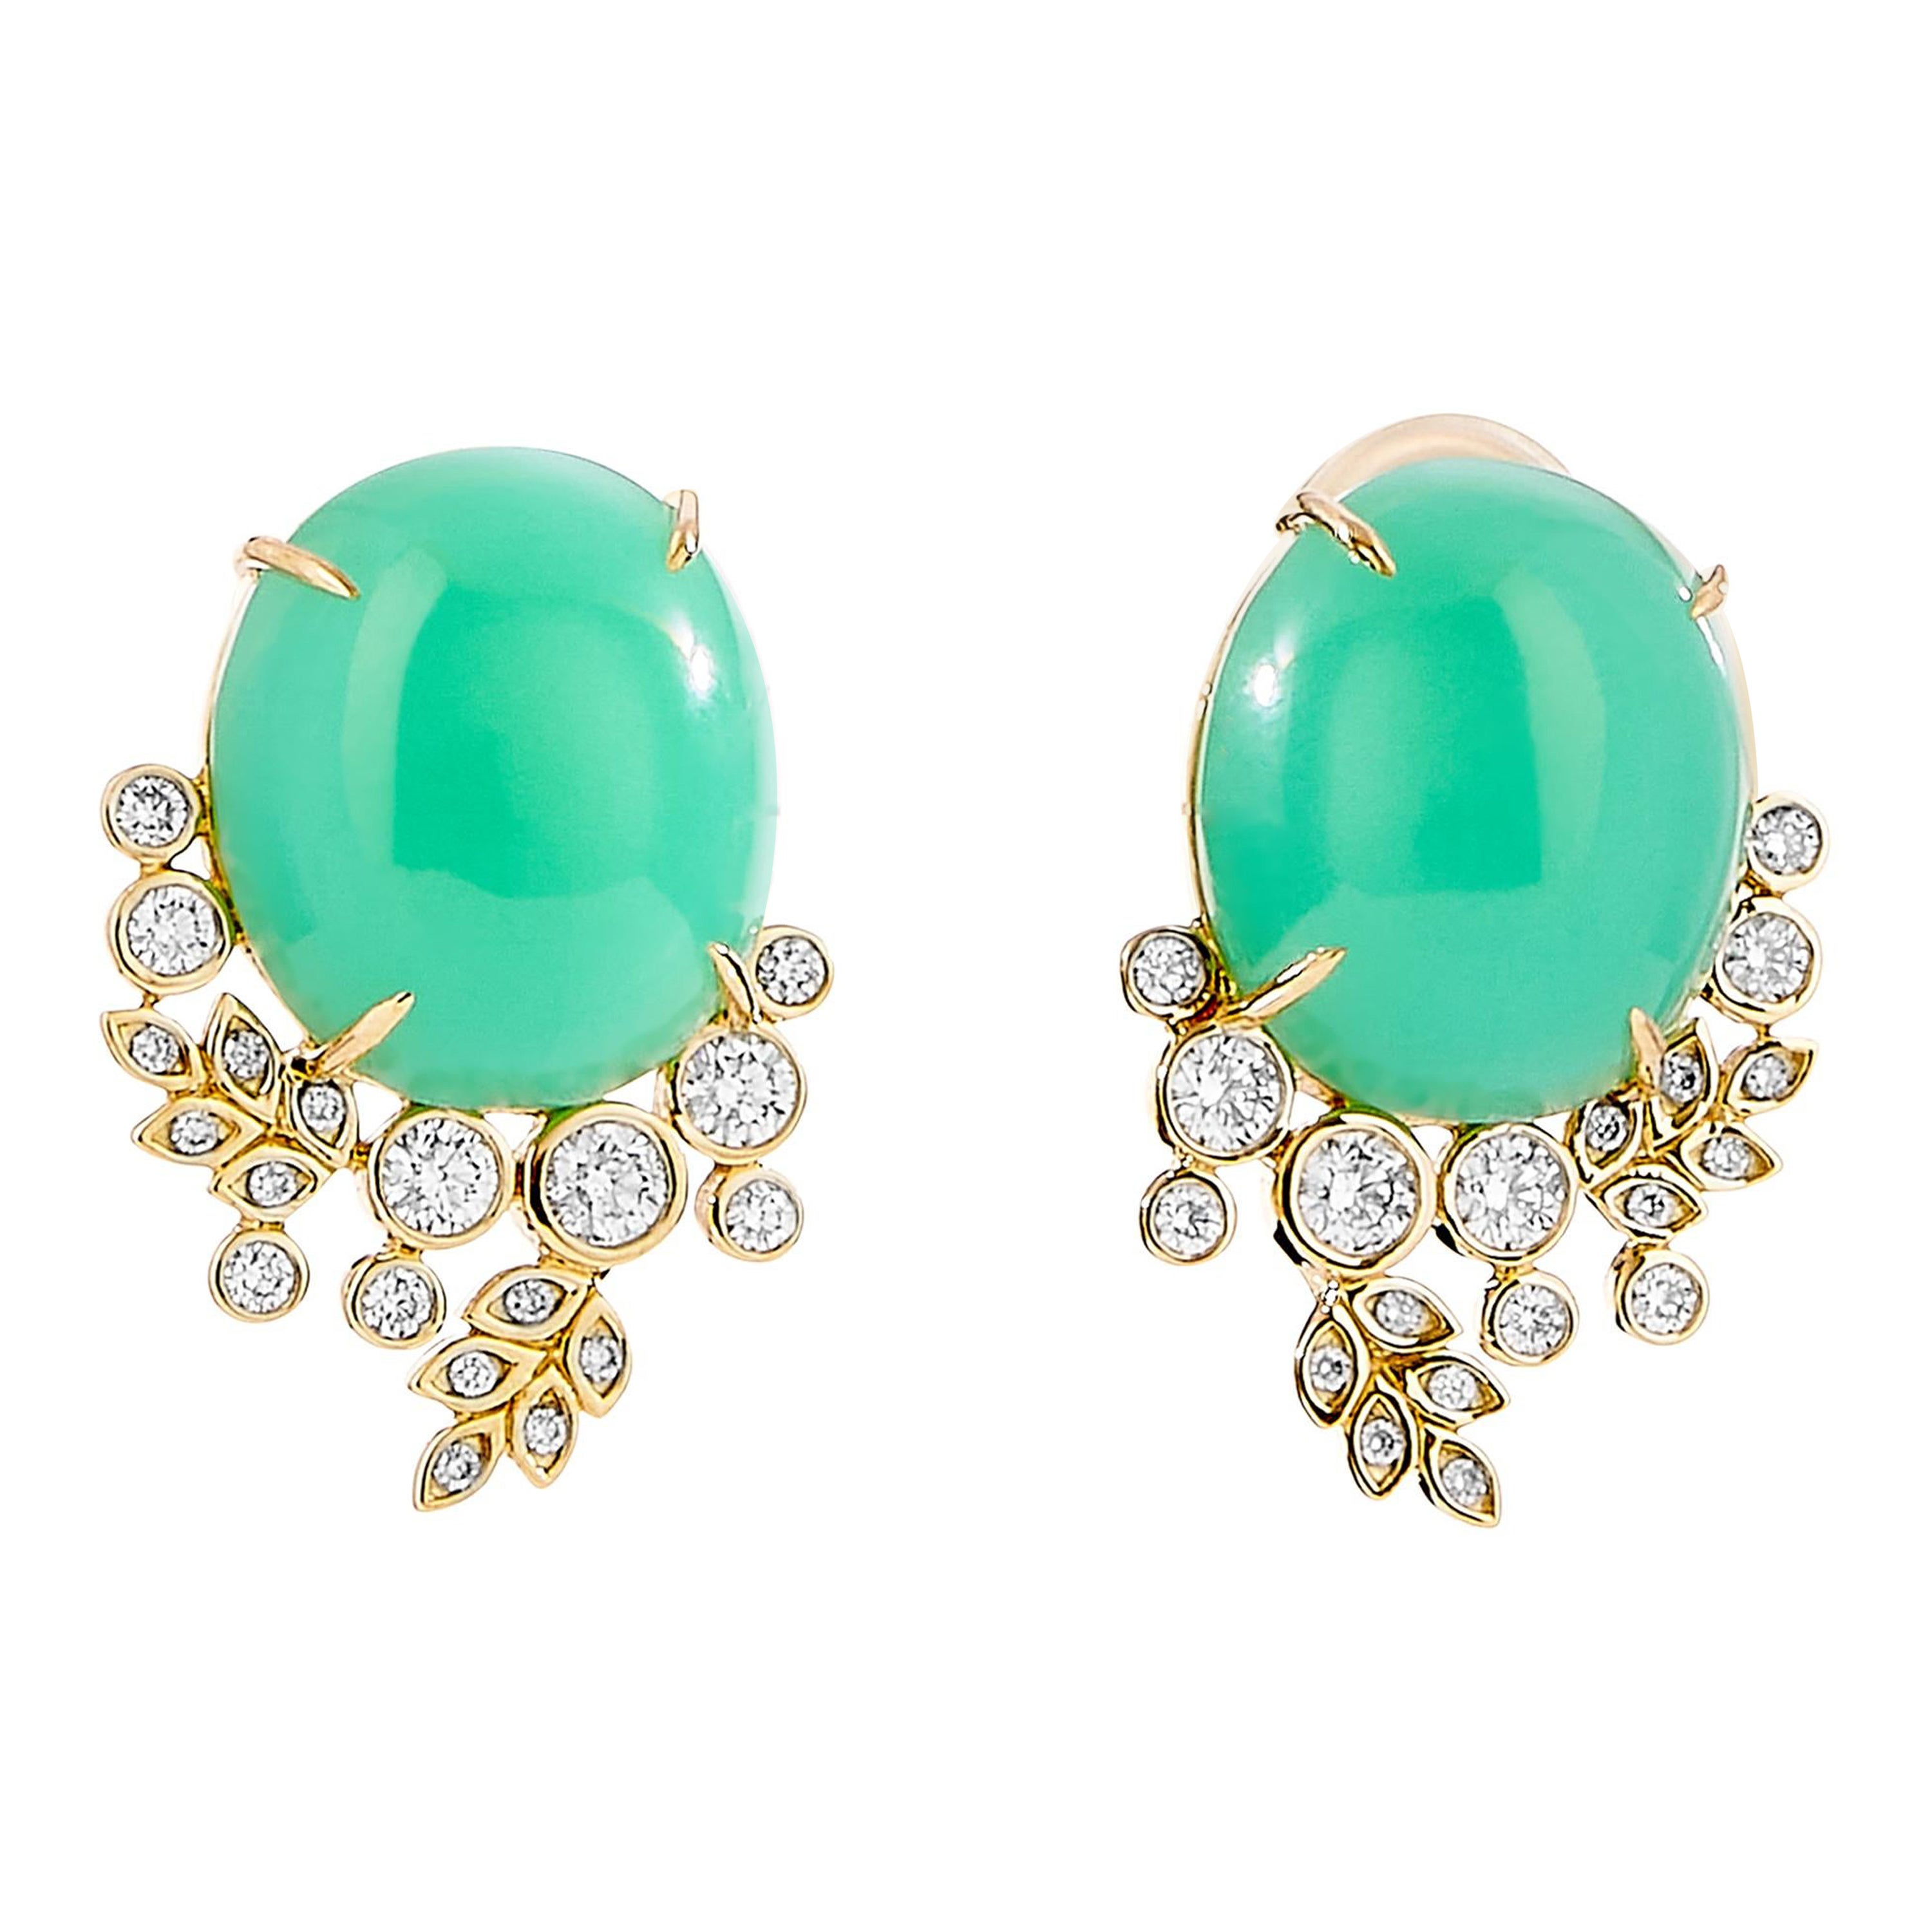 Syna Yellow Gold Vine Earrings with Chrysoprase and Diamonds